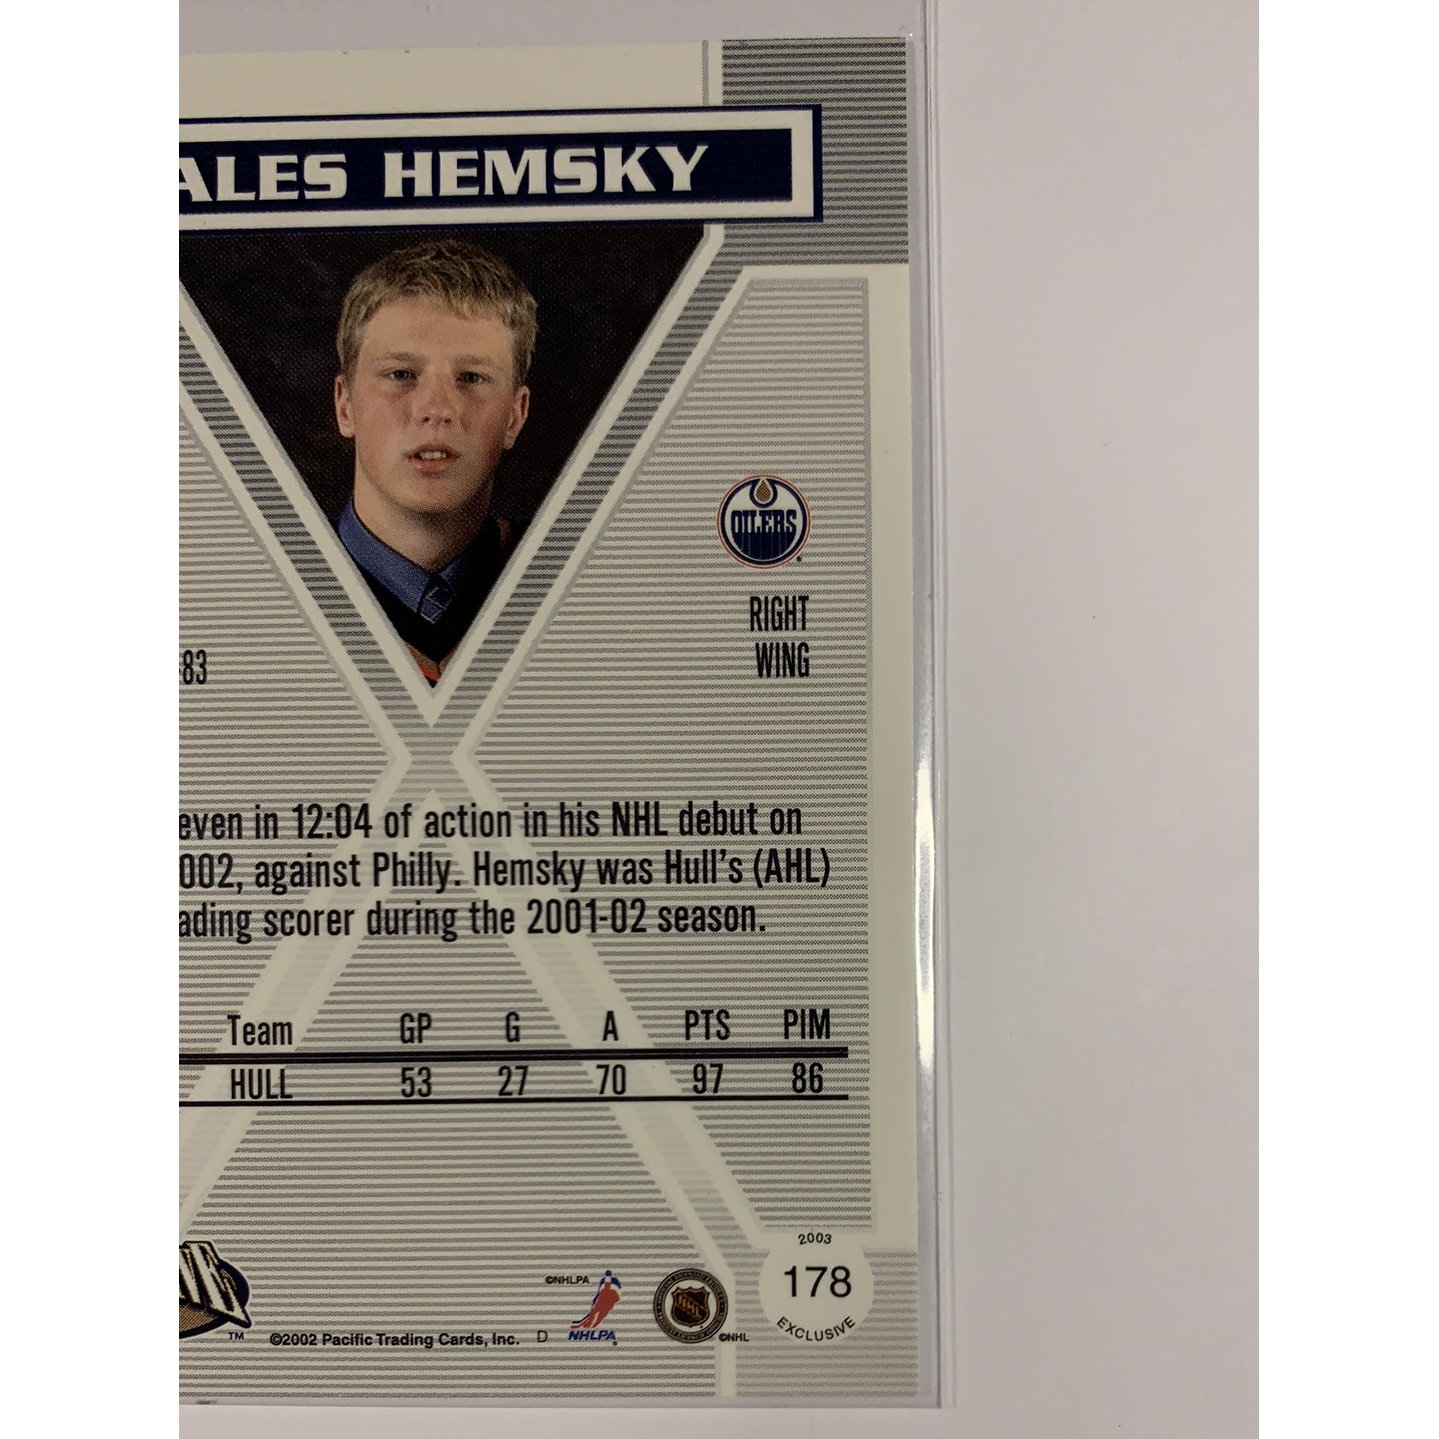  2002-03 Pacific Exclusive Ales Hemsky Rookie  Local Legends Cards & Collectibles